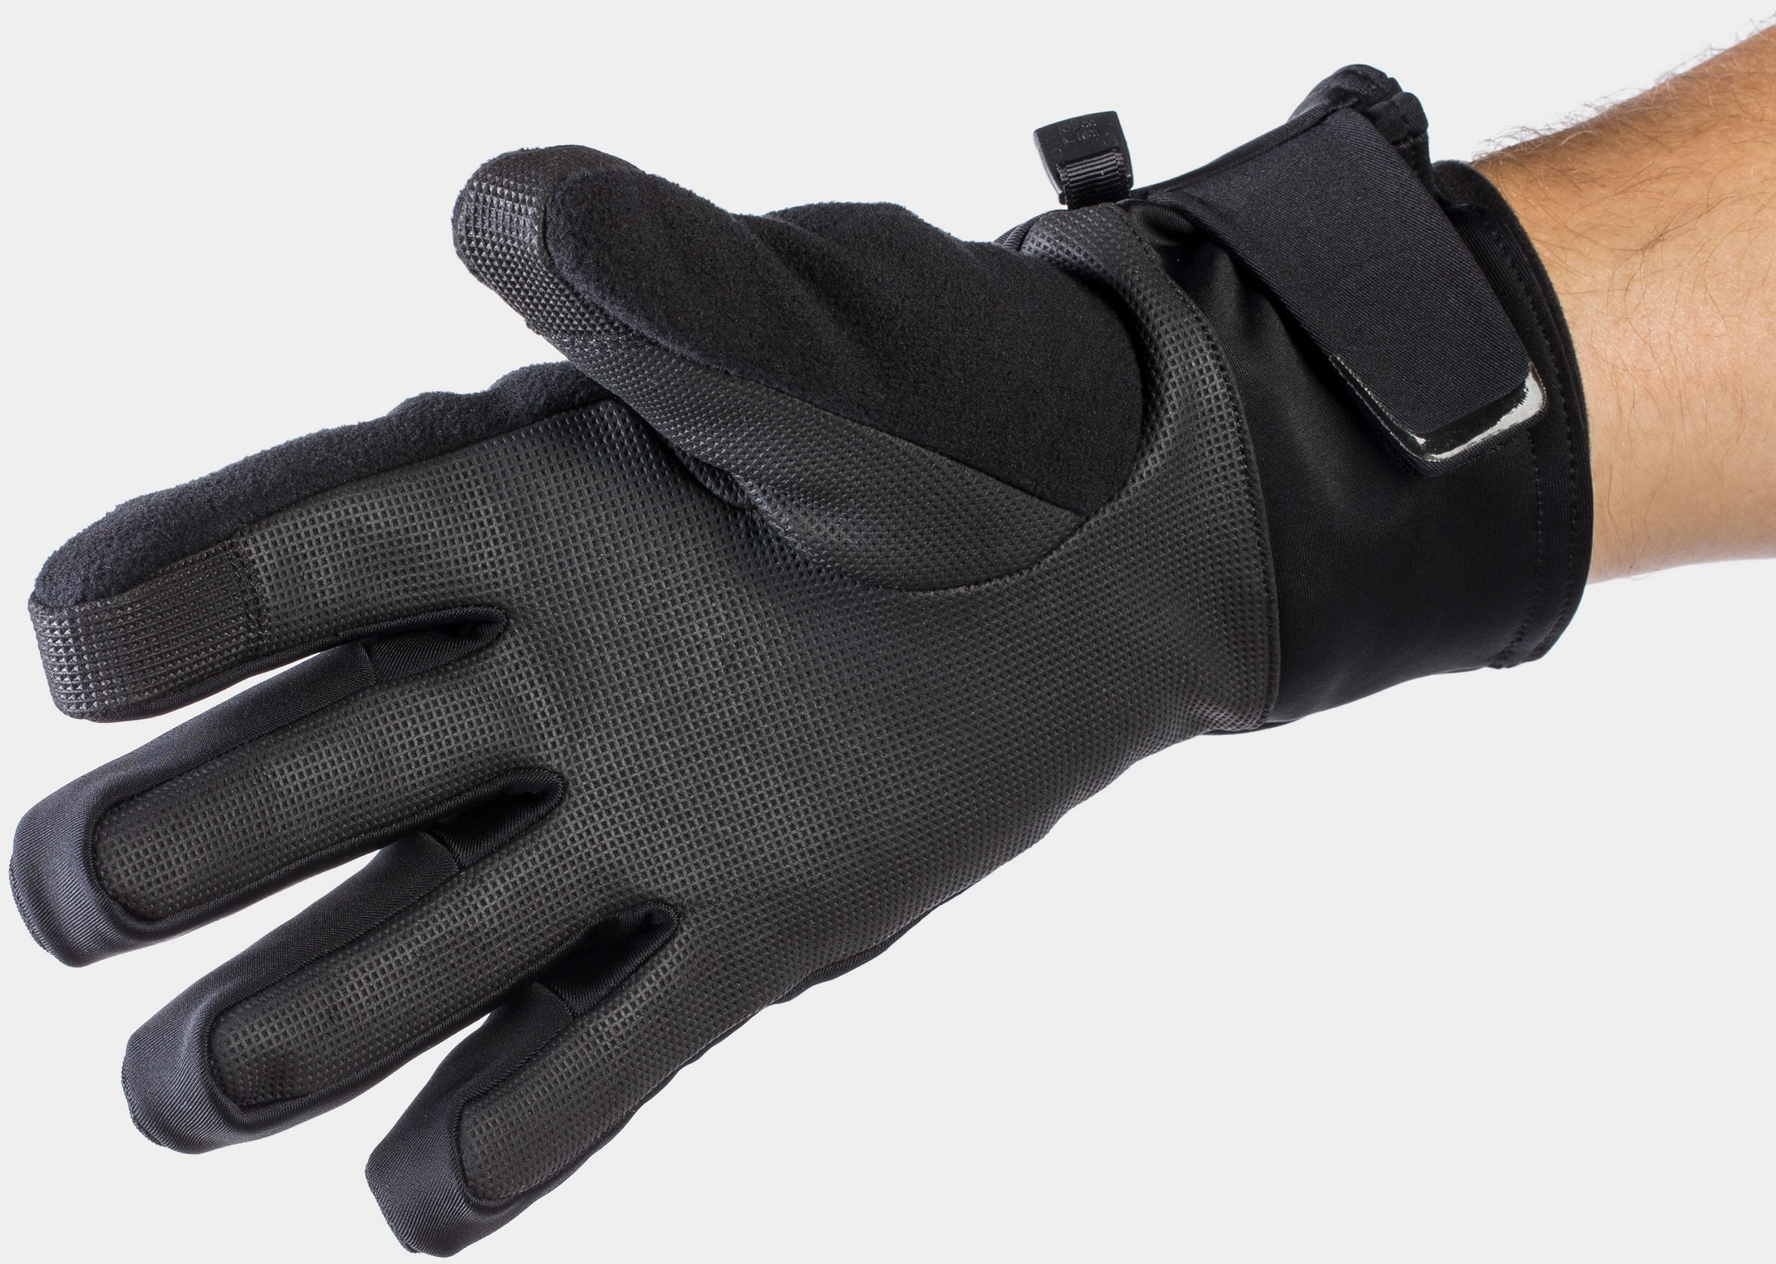 Velocis Softshell Cycling Glove - Pedal Power